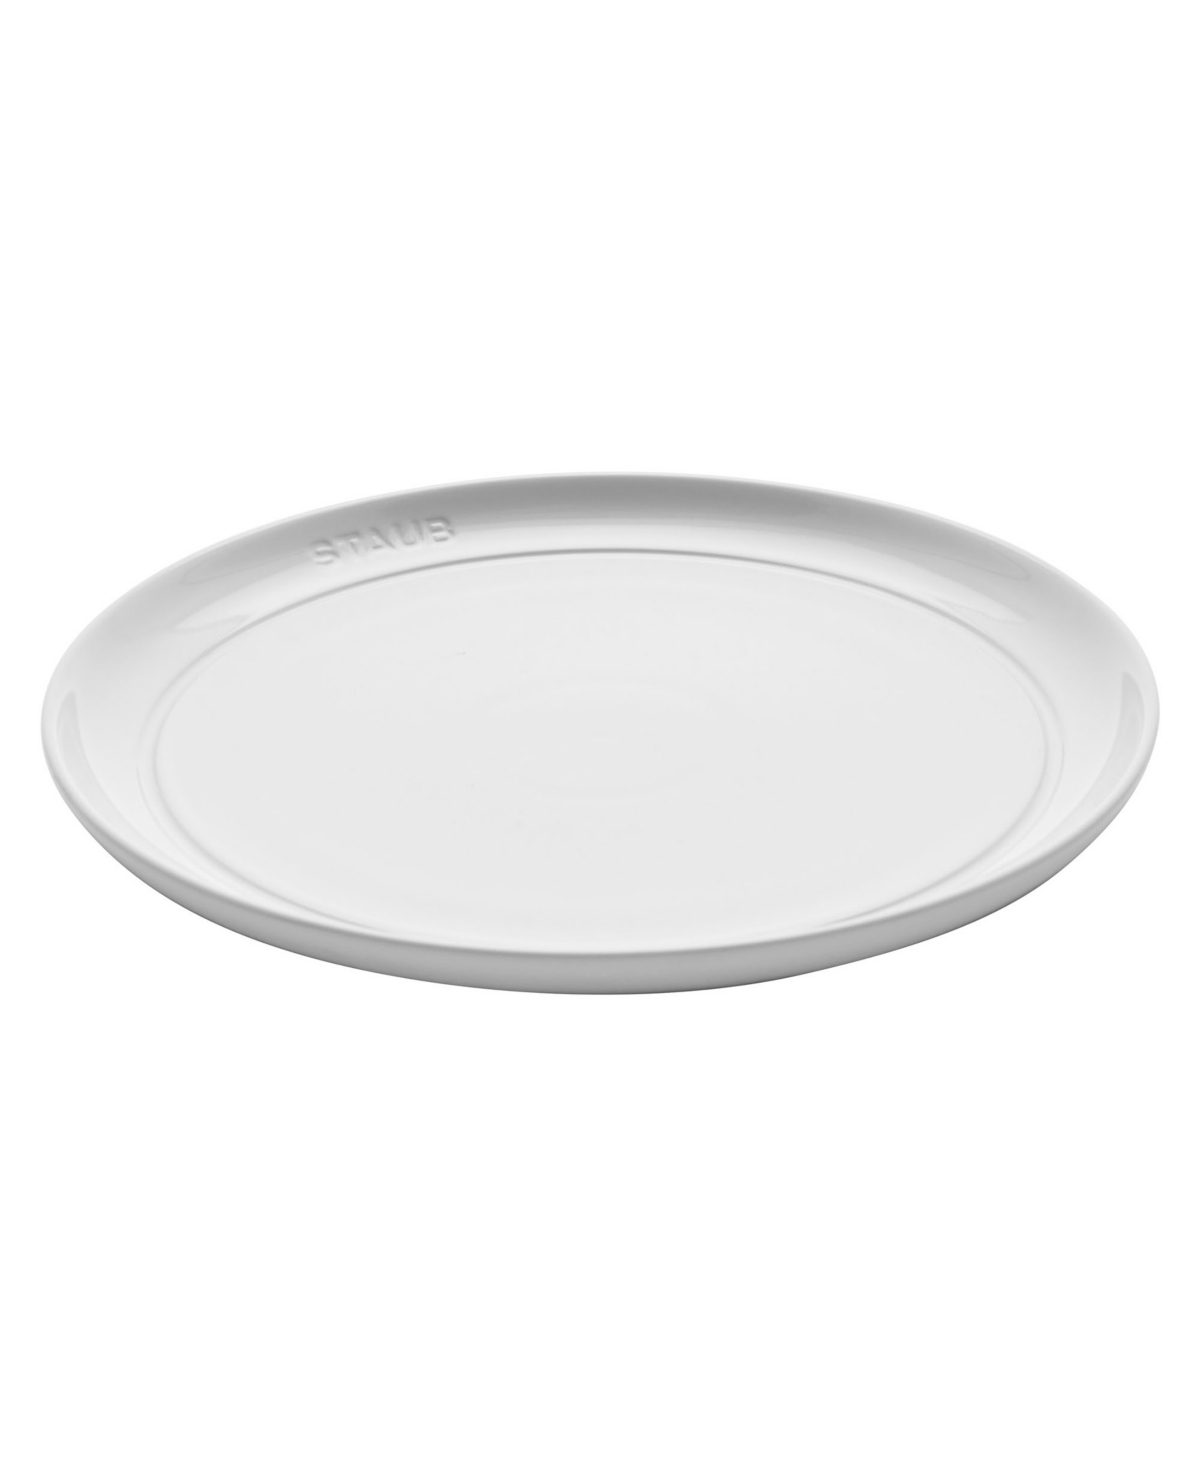 4 Piece 9" Salad Plate Set, Service for 4 - White